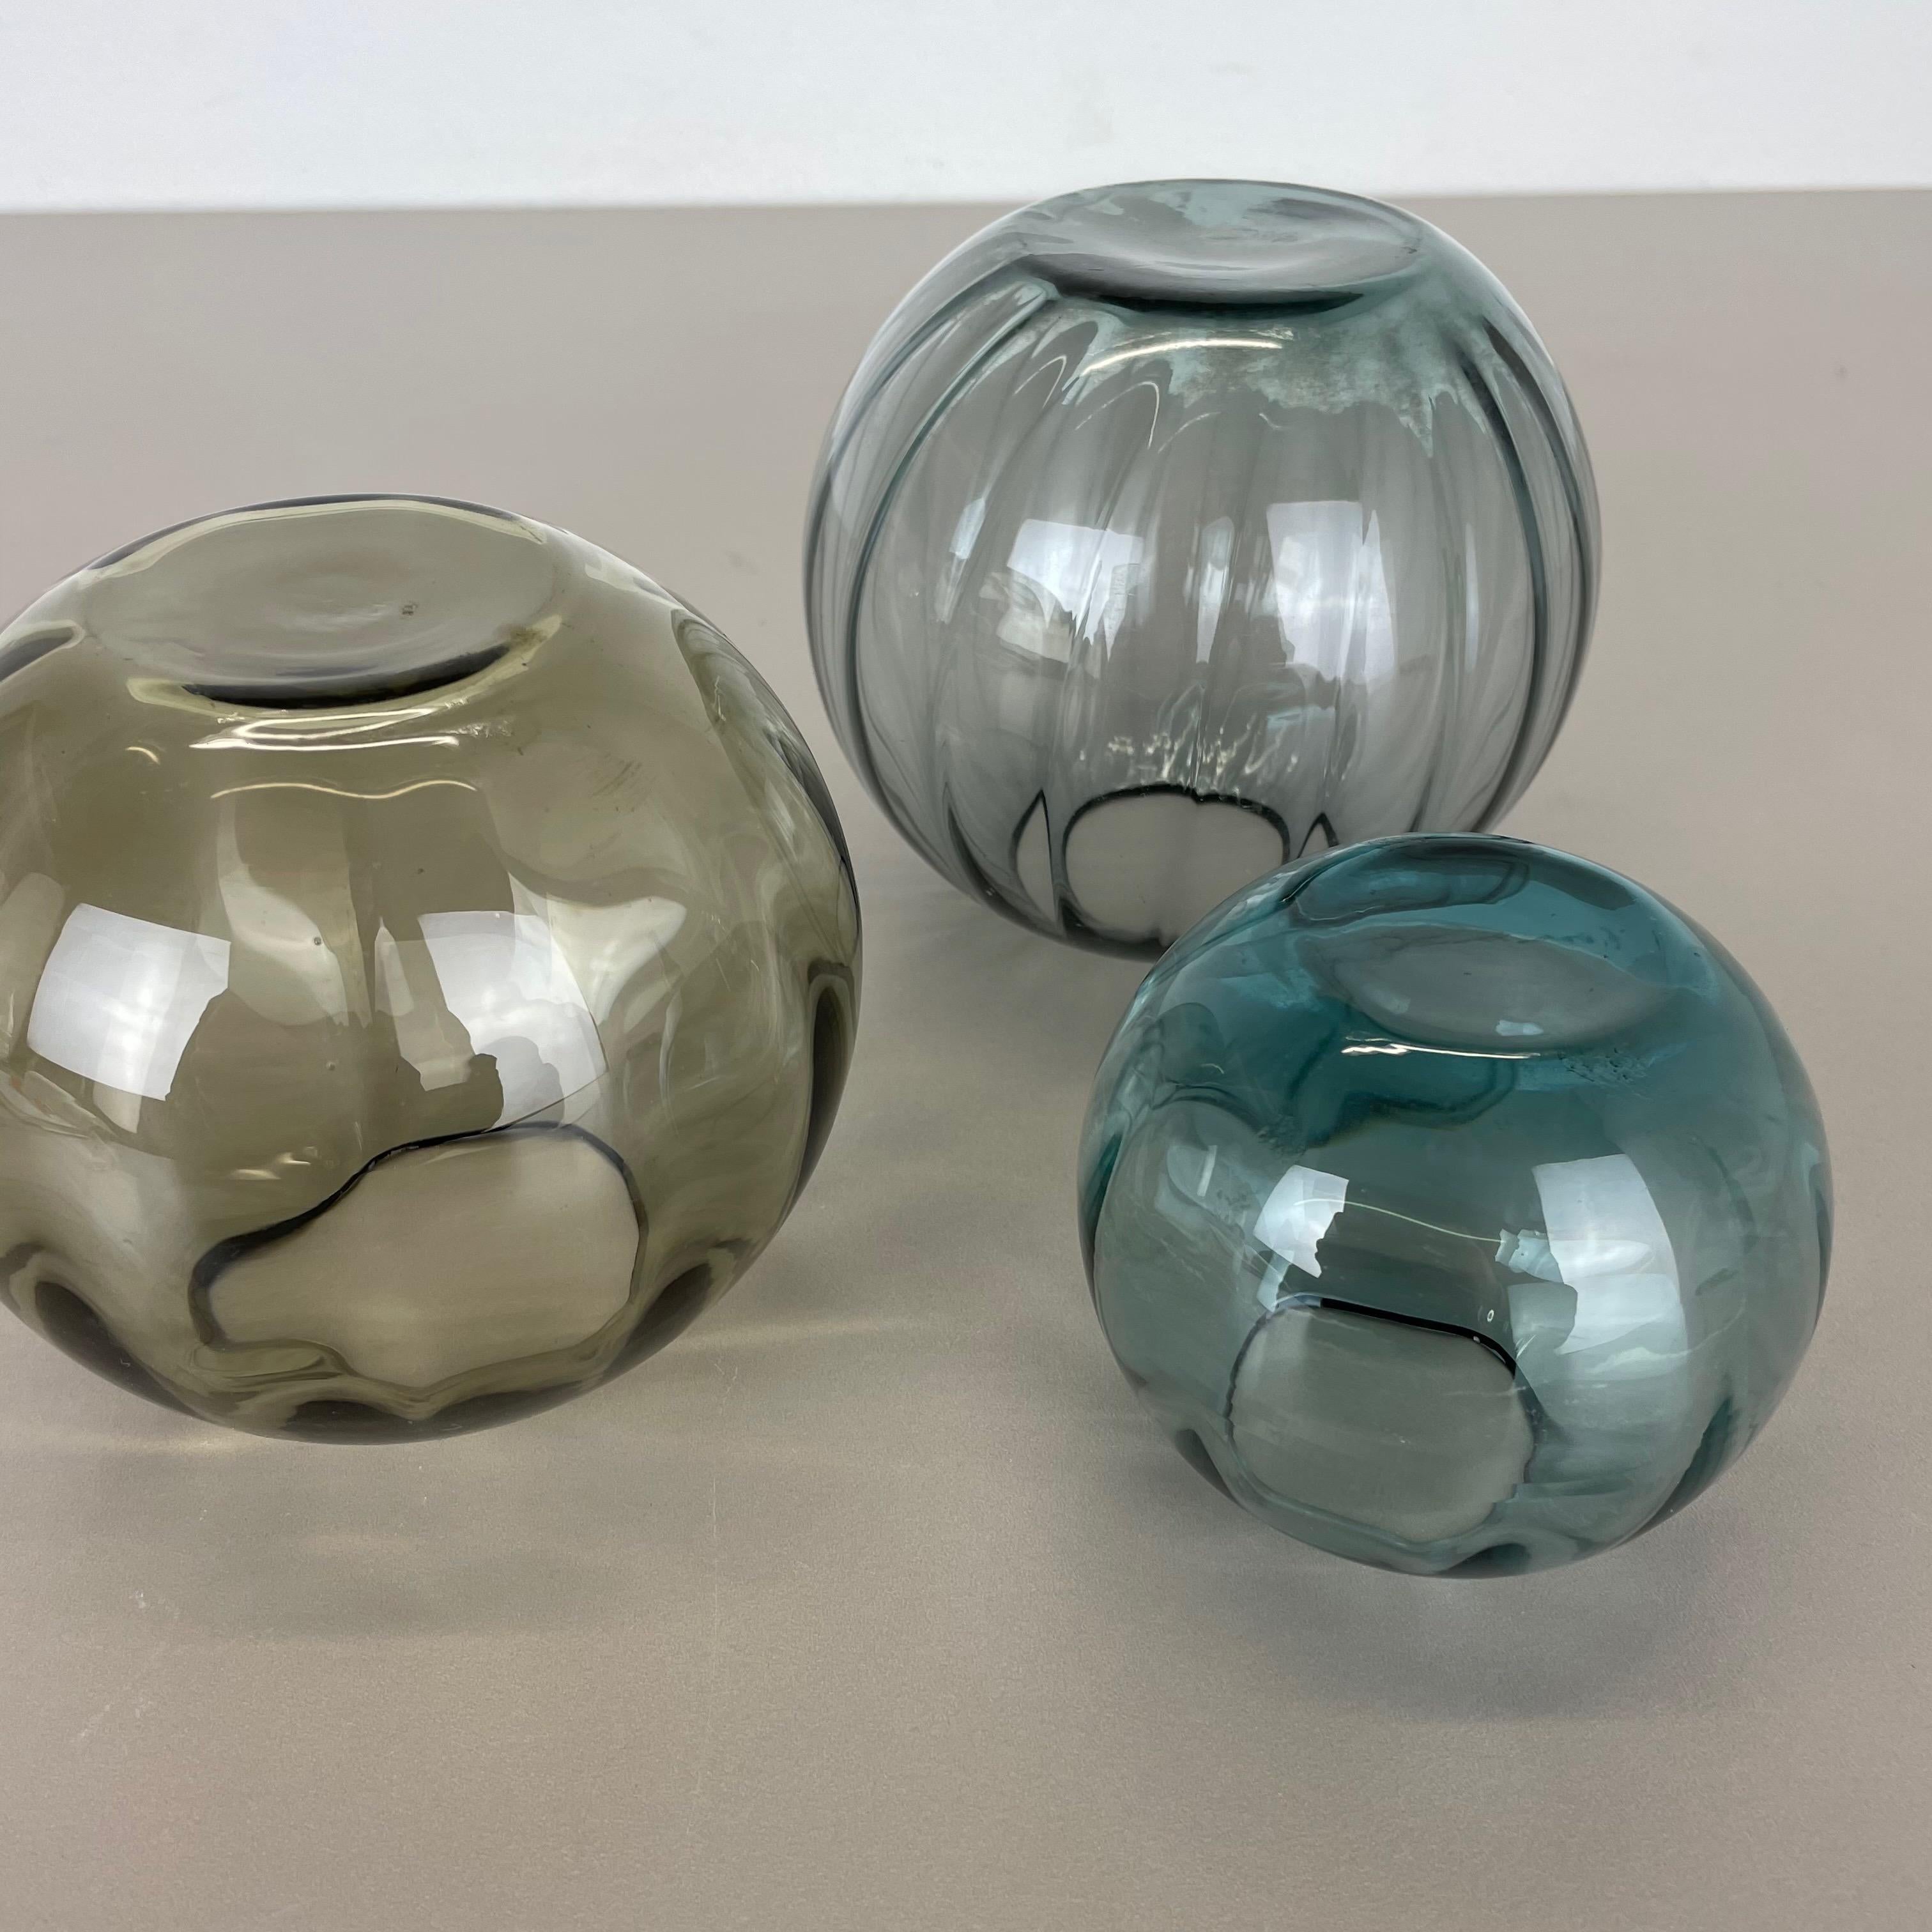 Vintage 1960s Set of 3 Ball Vases Turmaline by Wilhelm Wagenfeld for WMF Germany For Sale 12